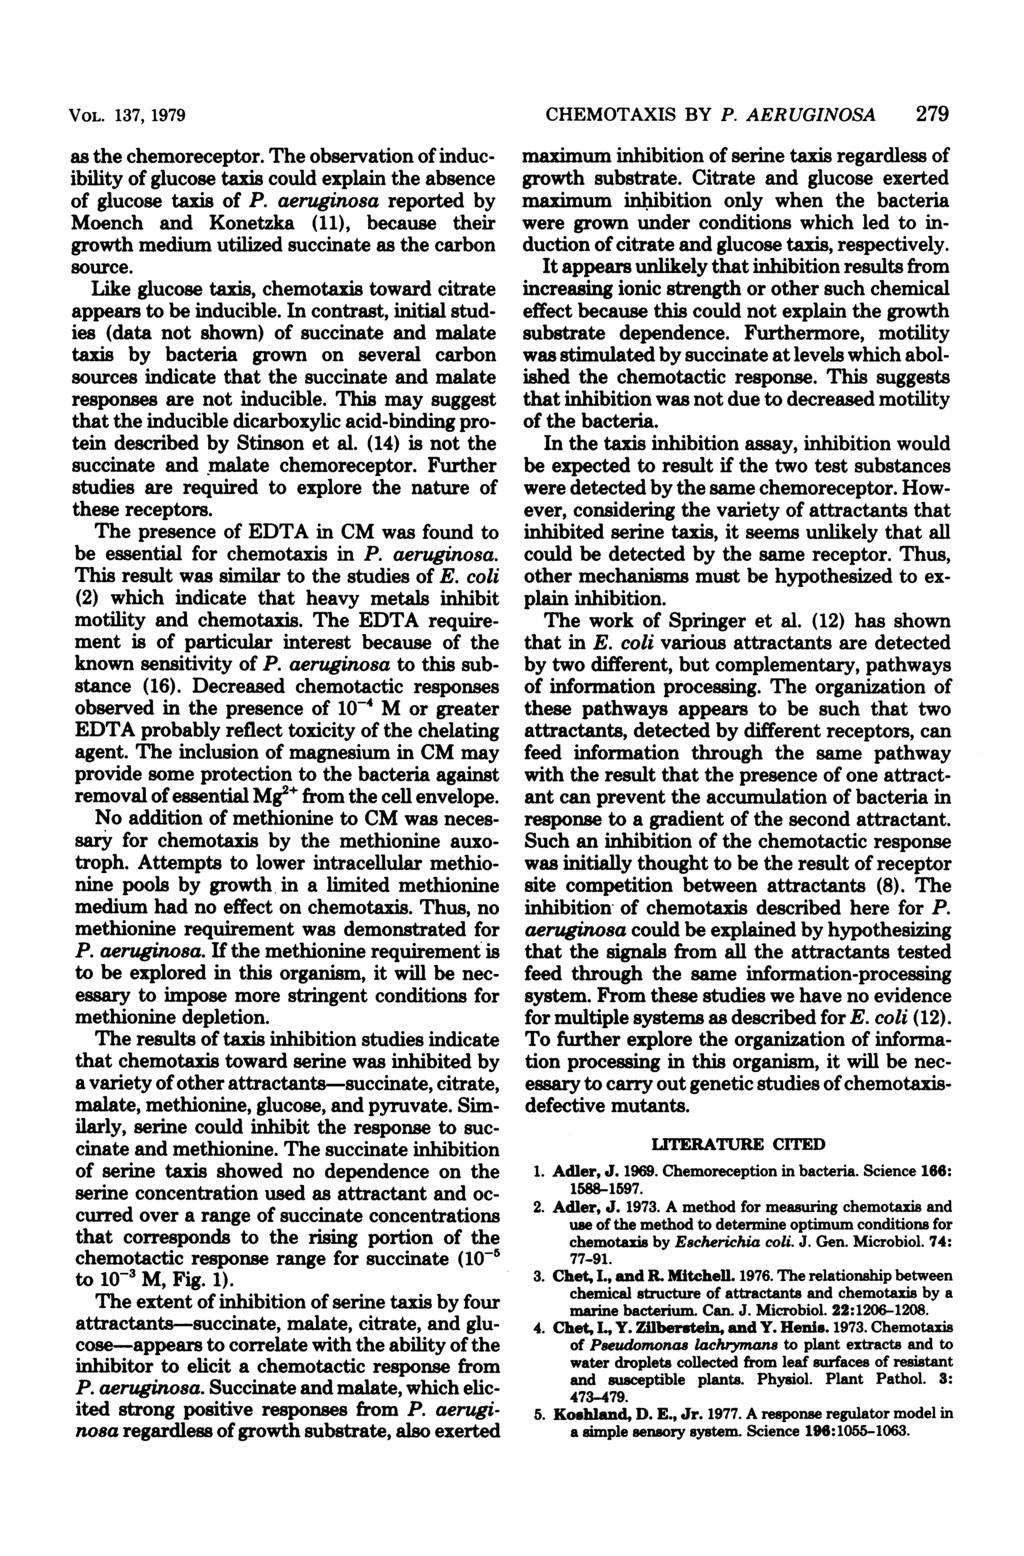 VOL. 137, 1979 as the chemoreceptor. The observation of inducibility of glucose taxis could explain the absence of glucose taxis of P.